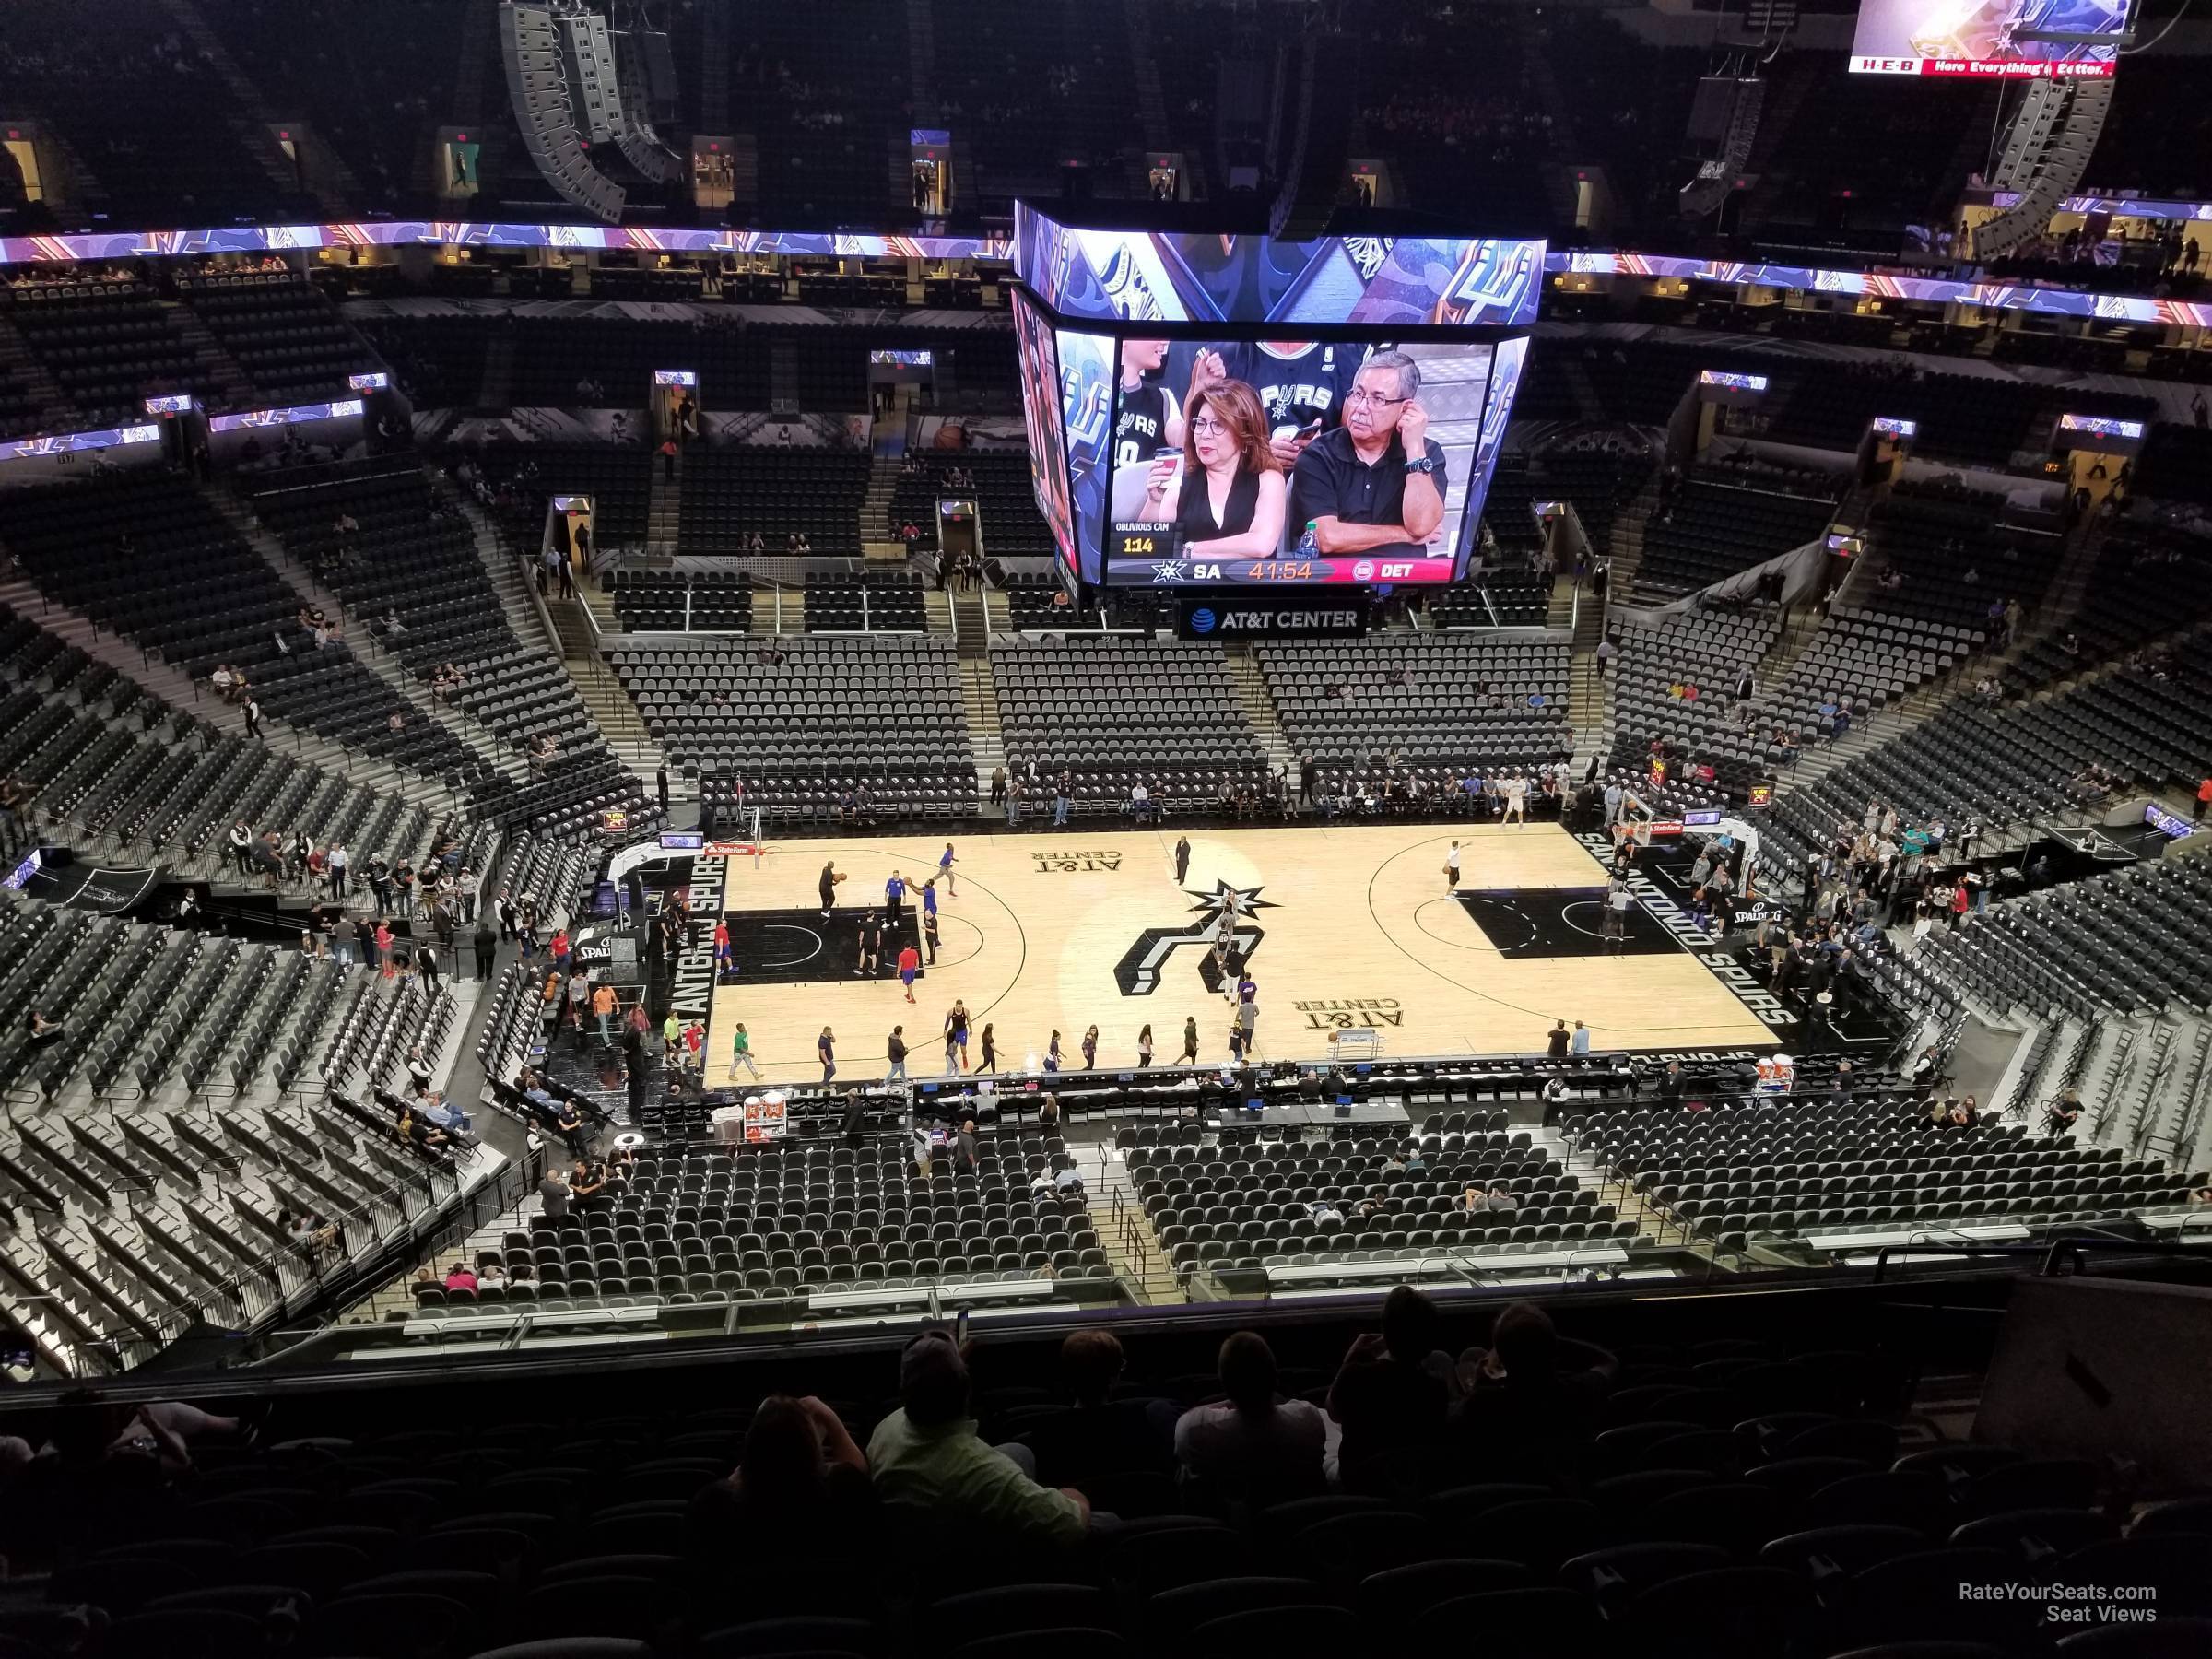 section 209, row 10 seat view  for basketball - at&t center